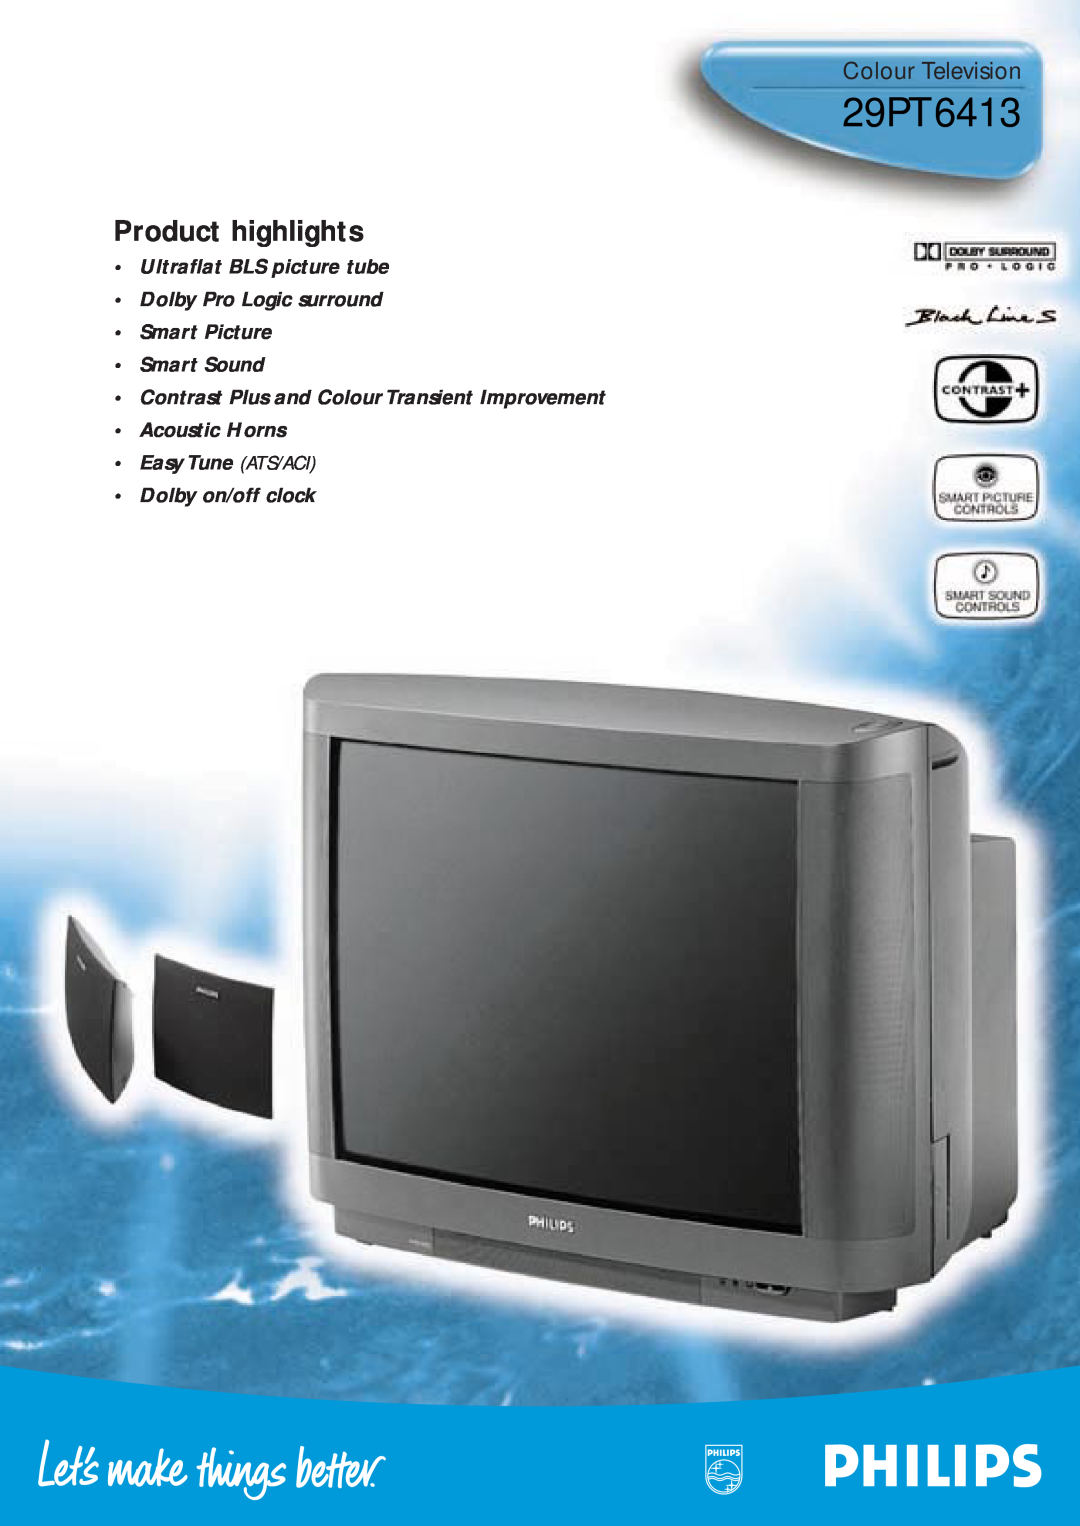 Philips 29PT6413 manual Colour Television, Product highlights, Smart Sound Contrast Plus and Colour Transient Improvement 